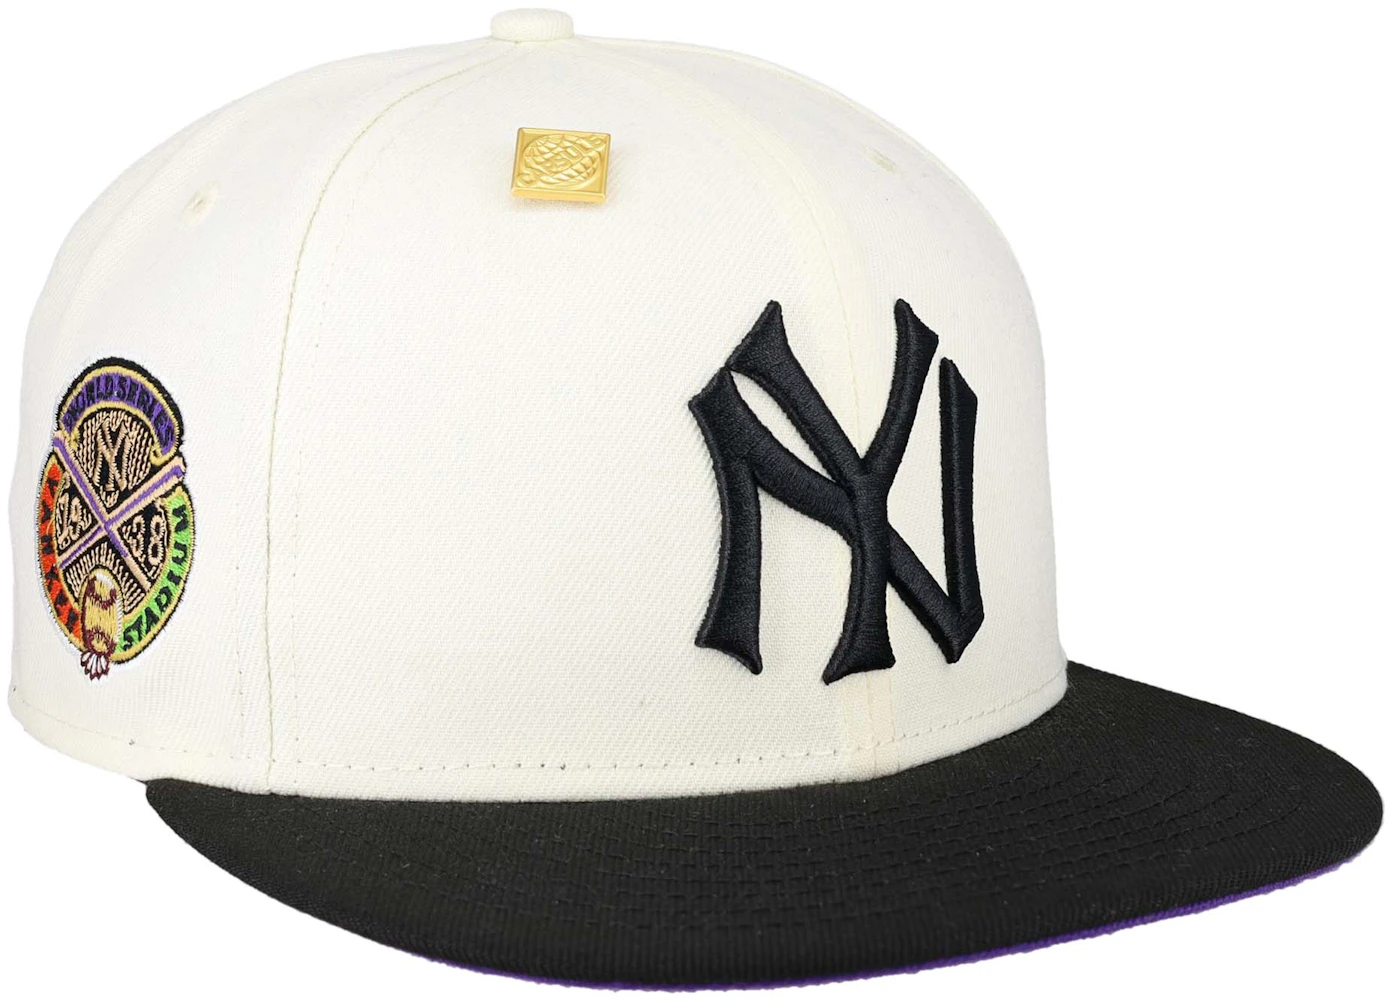 New York Yankees New Era 2023 Spring Color Basic 59FIFTY Fitted